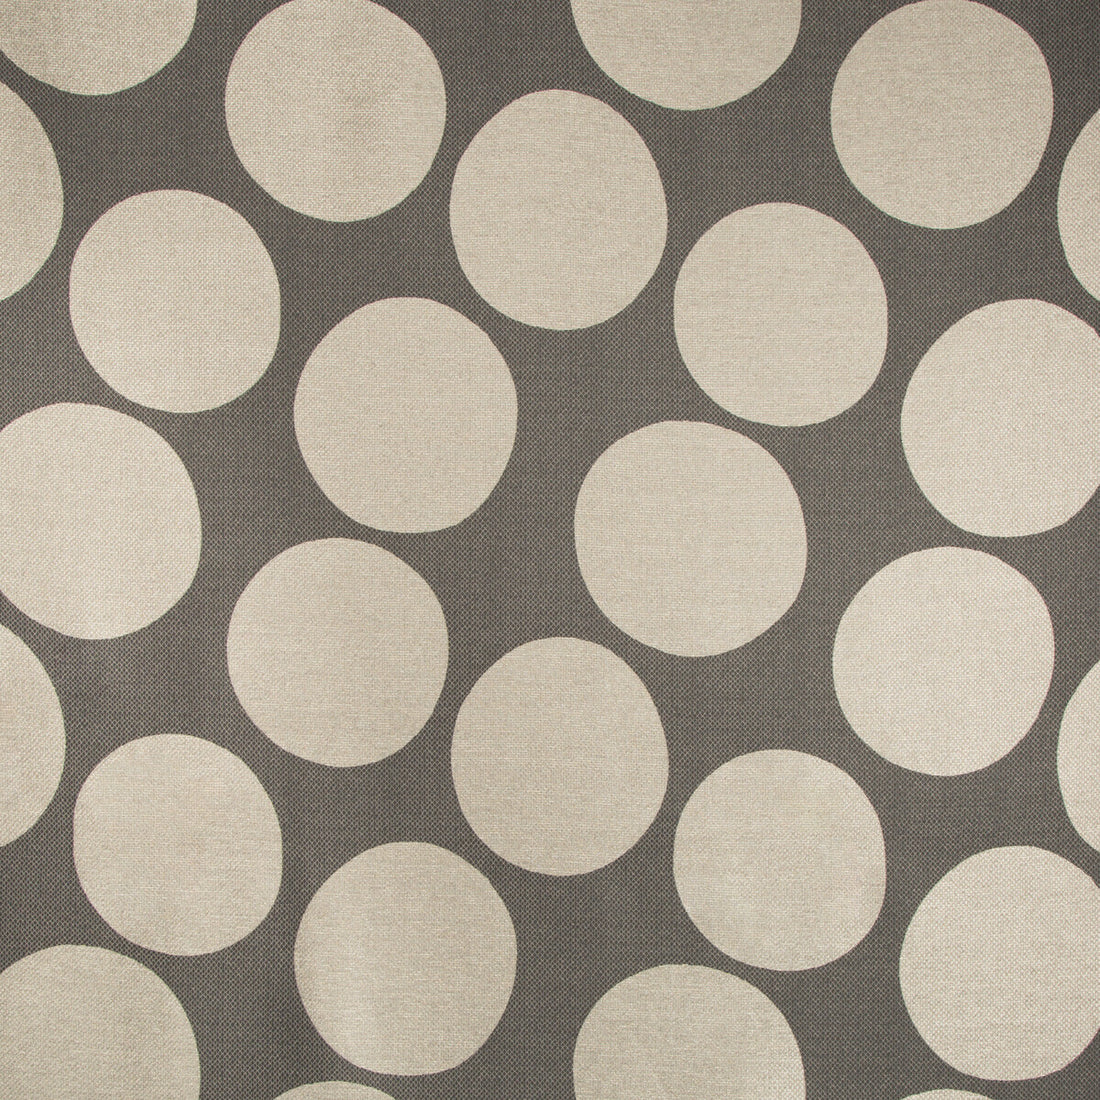 In The Round fabric in pyrite color - pattern 4454.21.0 - by Kravet Couture in the Modern Tailor collection